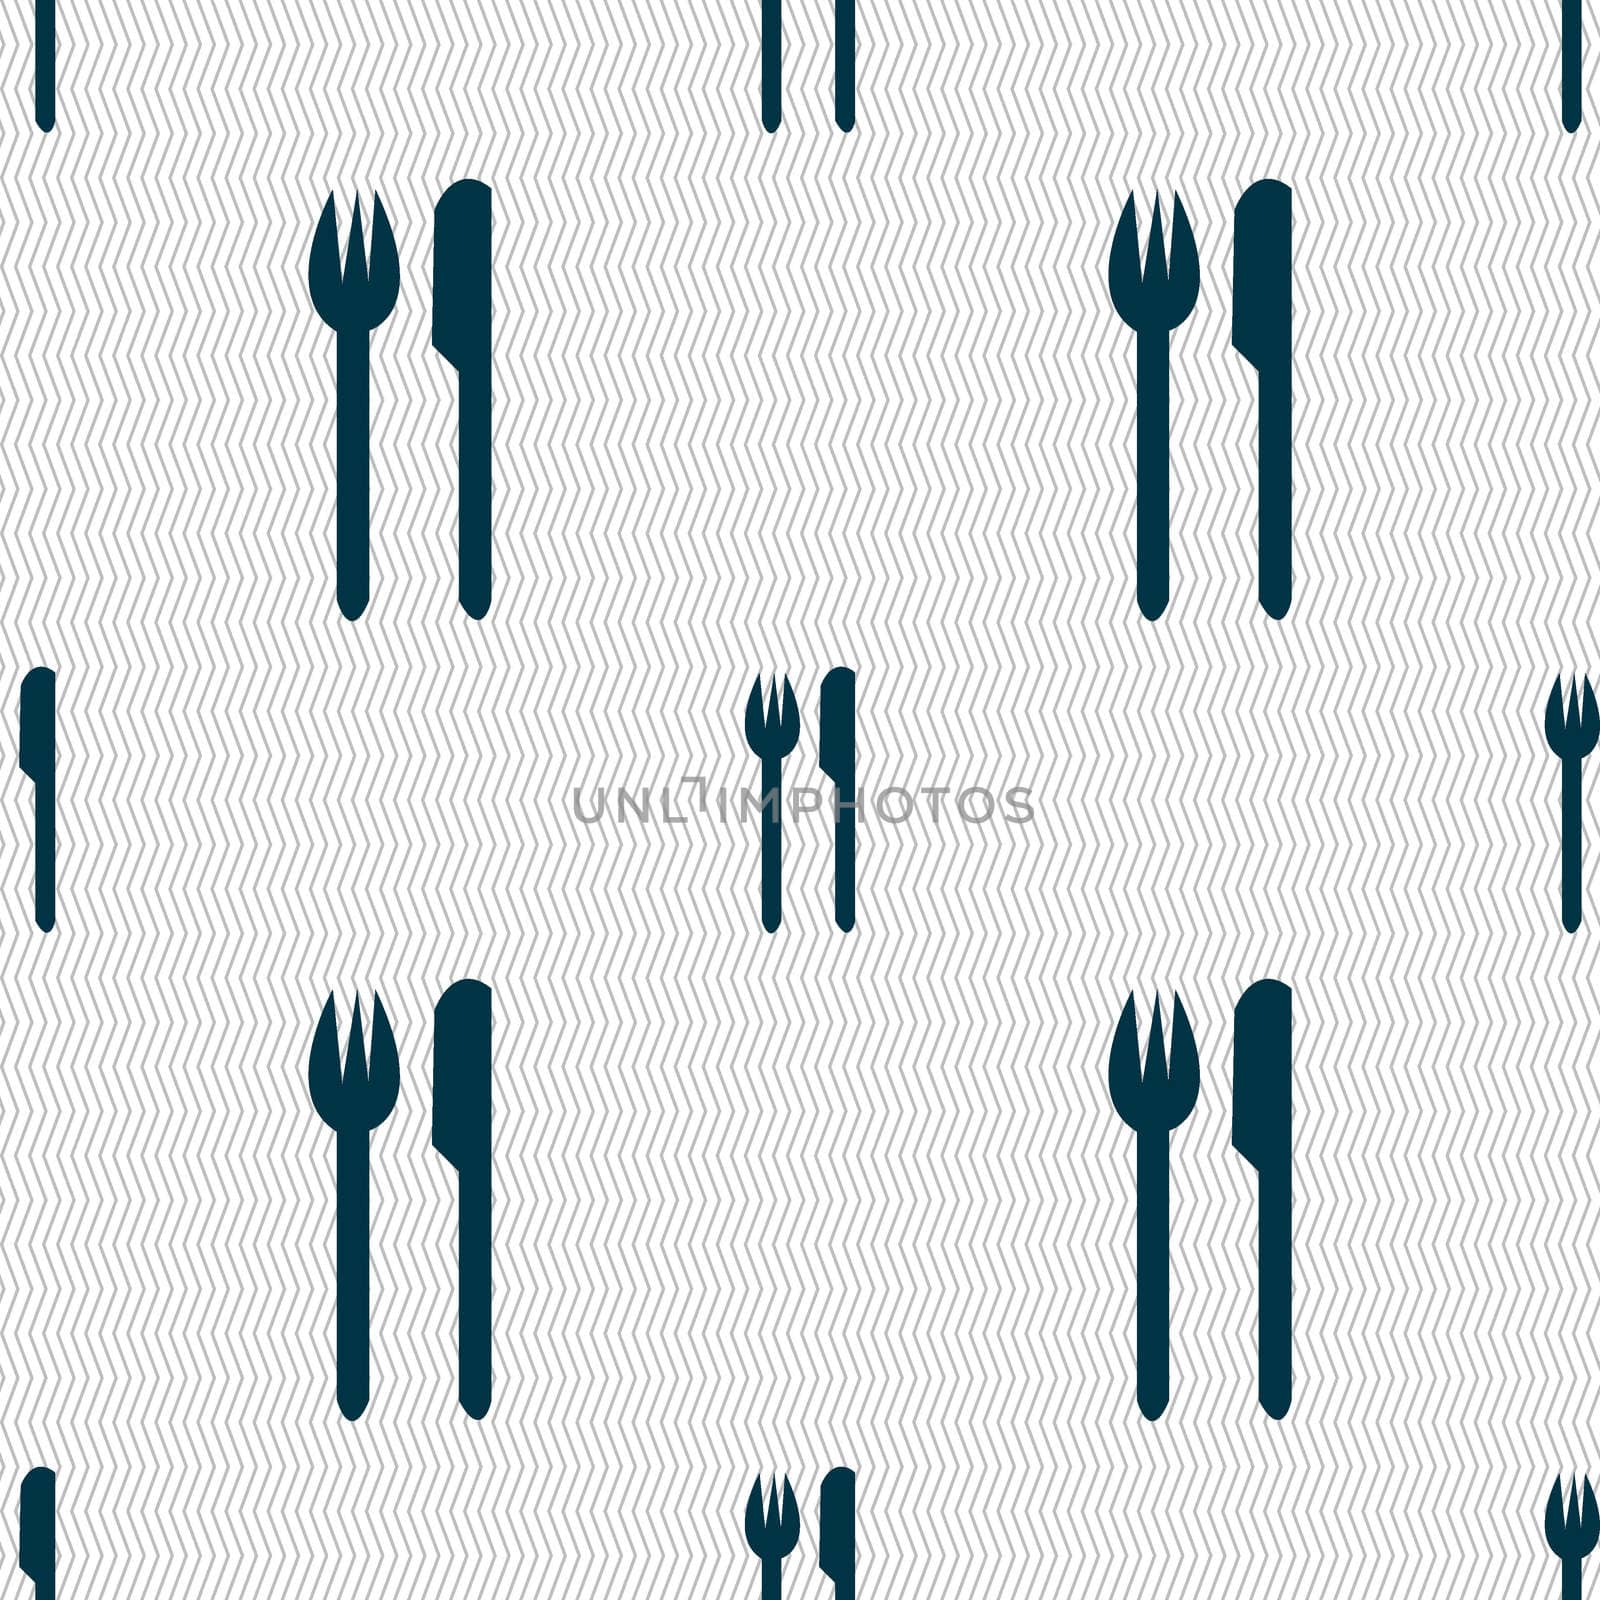 Eat sign icon. Cutlery symbol. Fork and knife. Seamless abstract background with geometric shapes. illustration